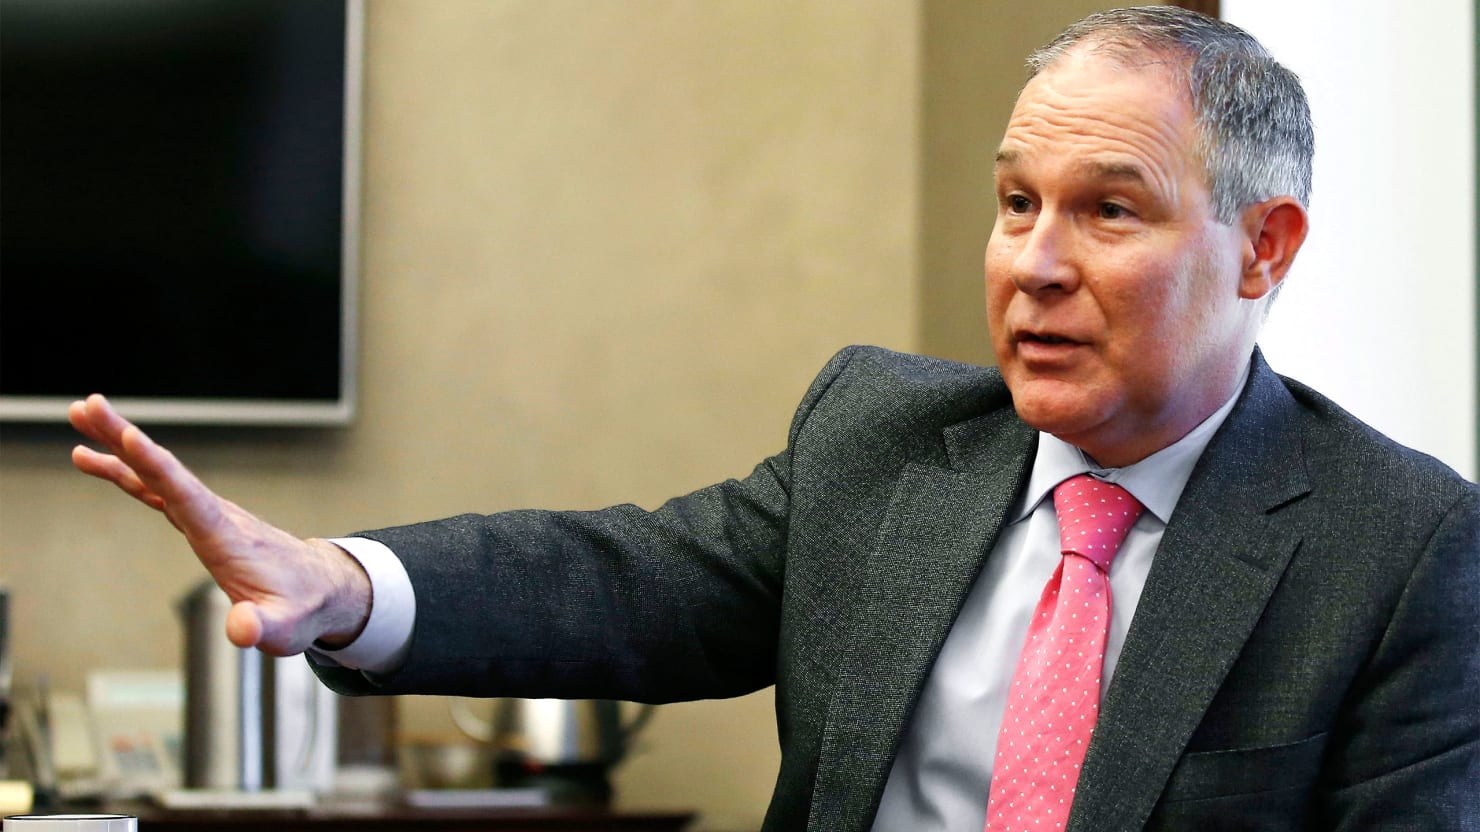 Scott Pruitt, Trump’s Climate-Denying EPA Pick, Is Worse Than You Think